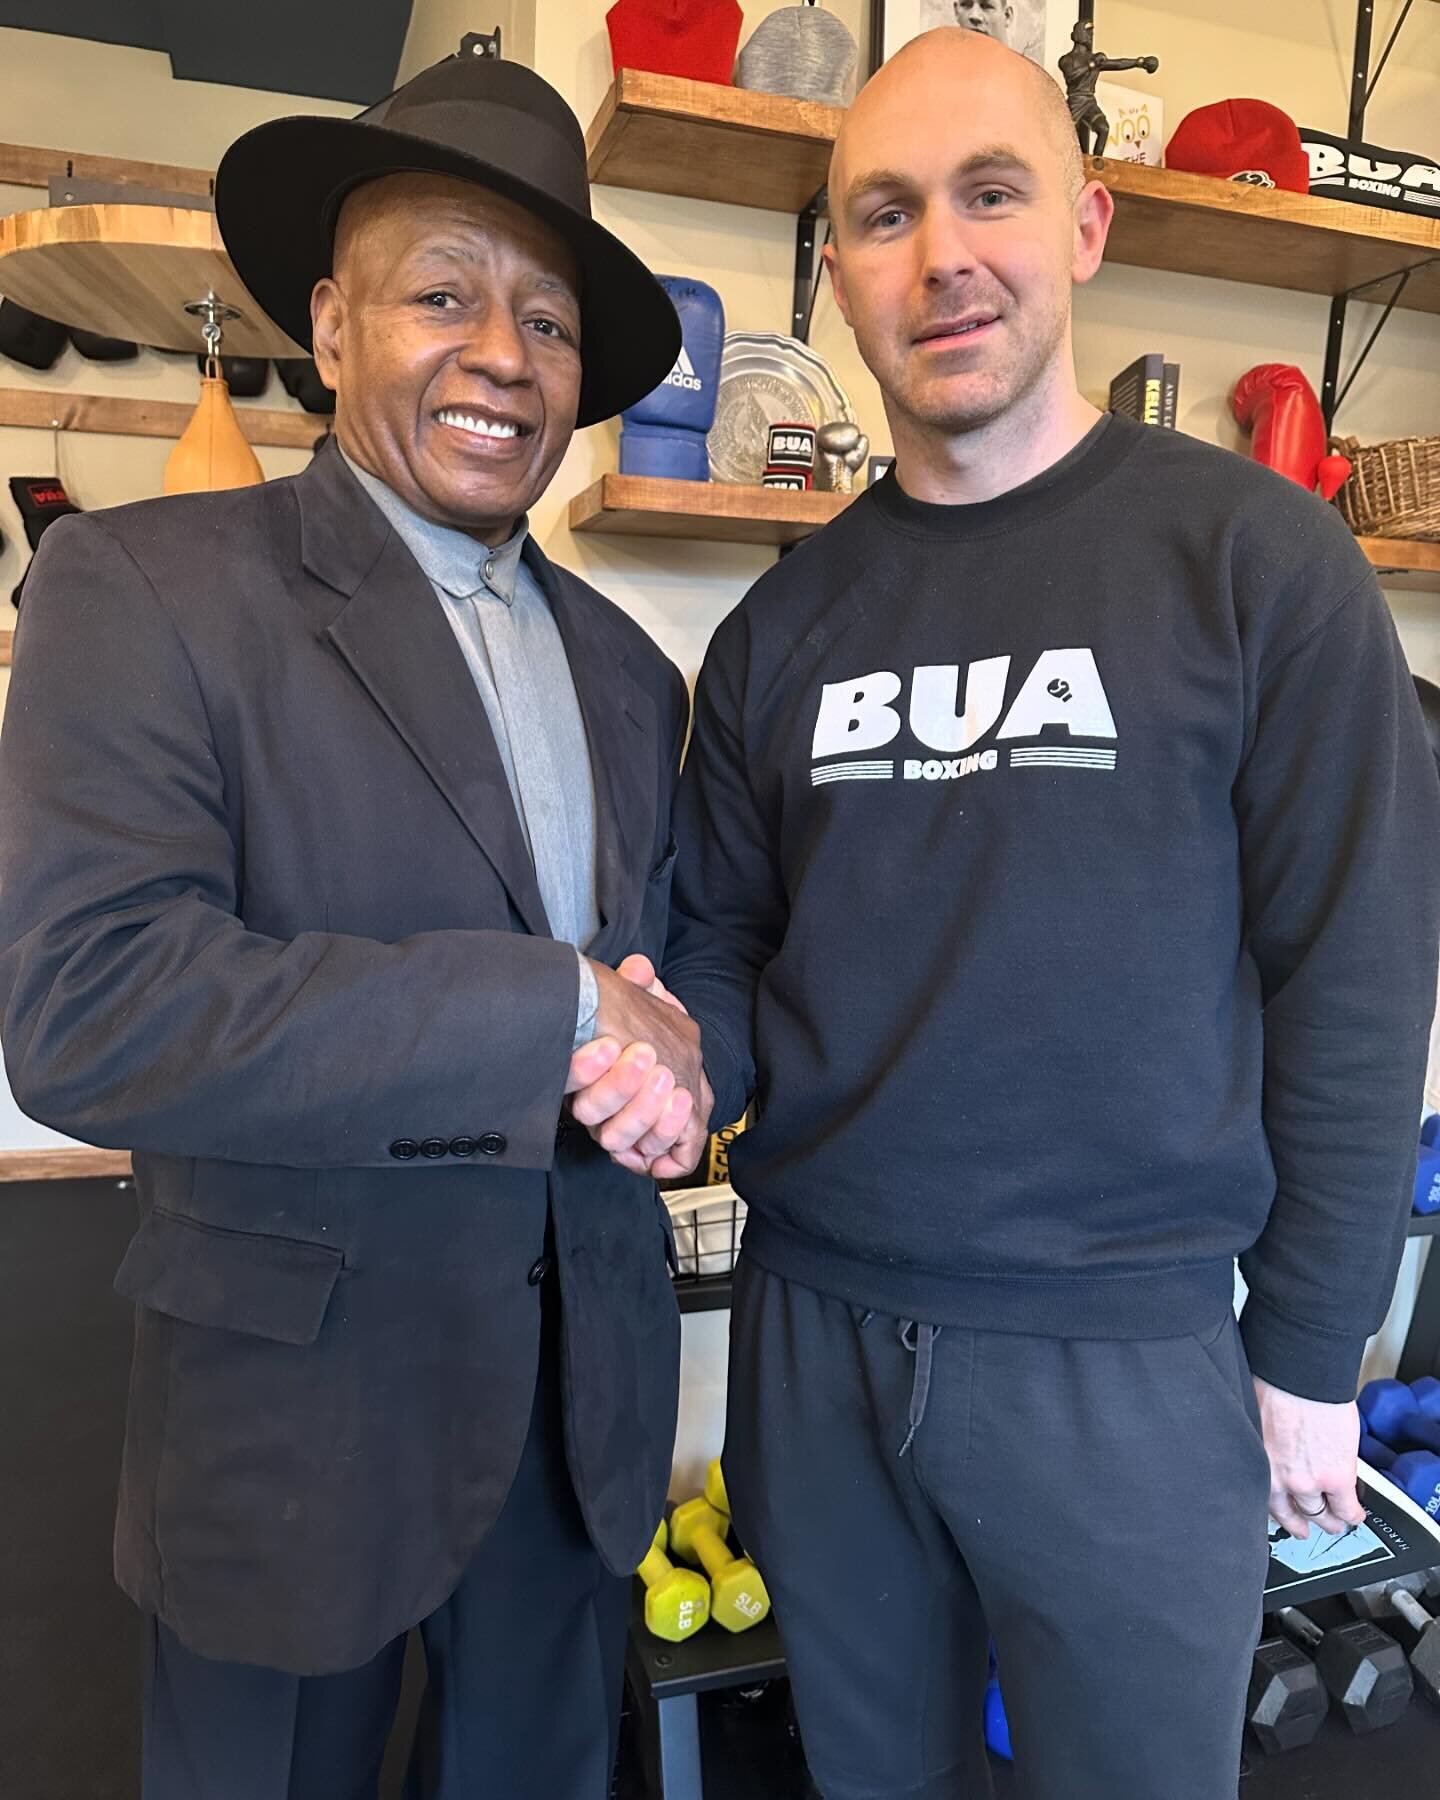 Delighted to have Harold Weston stop by the gym. Absolute gentleman with an amazing story. Former golden gloves champion and world title challenger 🥊